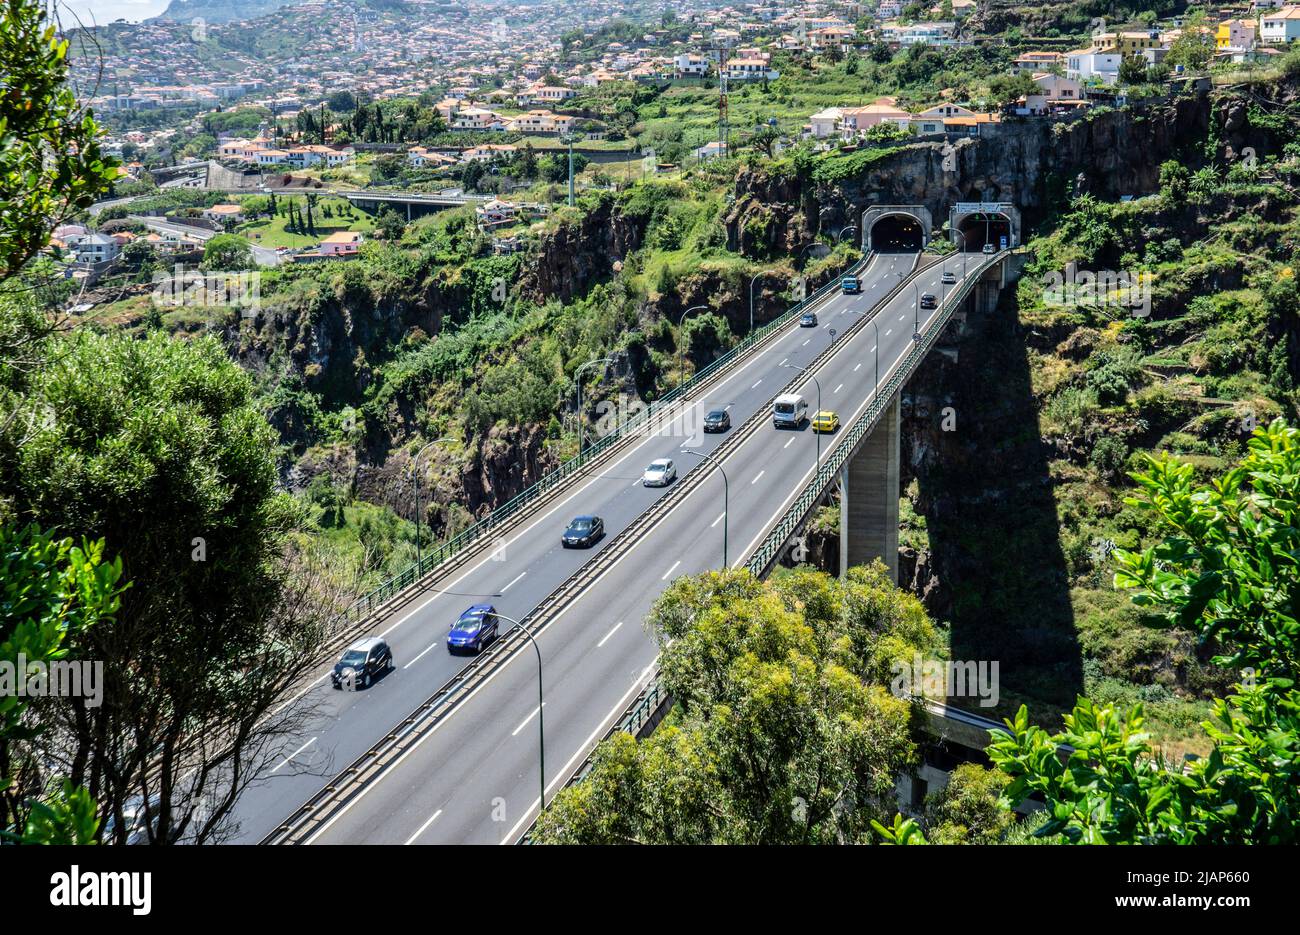 The motorway flyover that links the capital city of Madeira, Funchal, to its international airport. Stock Photo